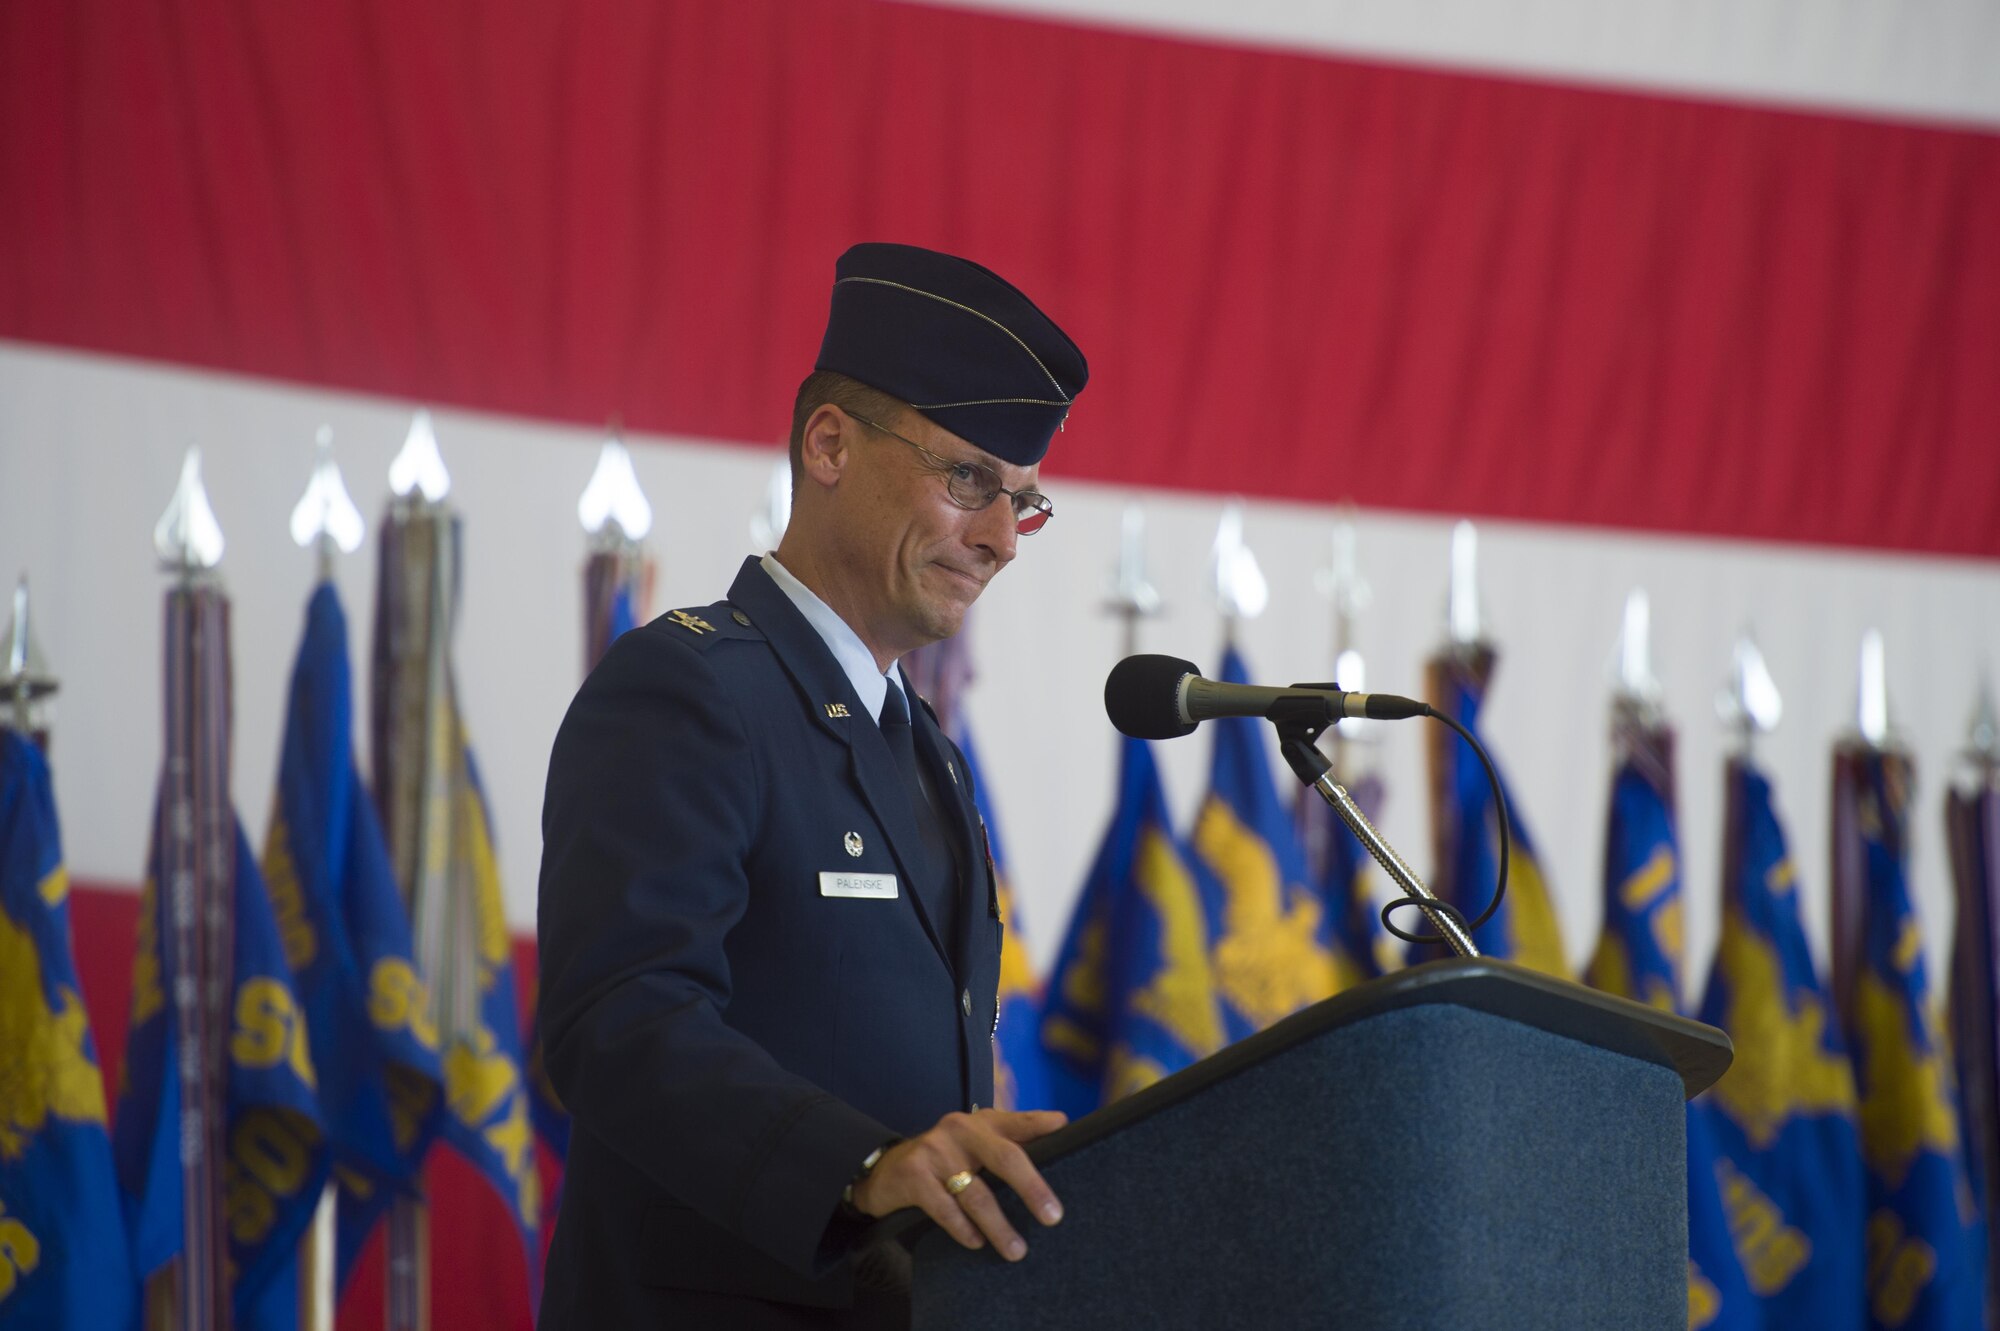 Col. Tom Palenske, commander of the 1st Special Operations Wing, addresses 1st SOW Air Commandos during a change of command ceremony at Hurlburt Field, Fla., June 10, 2016. As the commander, Palenske will oversee the wing’s mission, which includes infiltration, resupply, air refueling, precision fire support and employing more than 70 aircraft. (U.S. Air Force photo by Airman 1st Class Kai White)